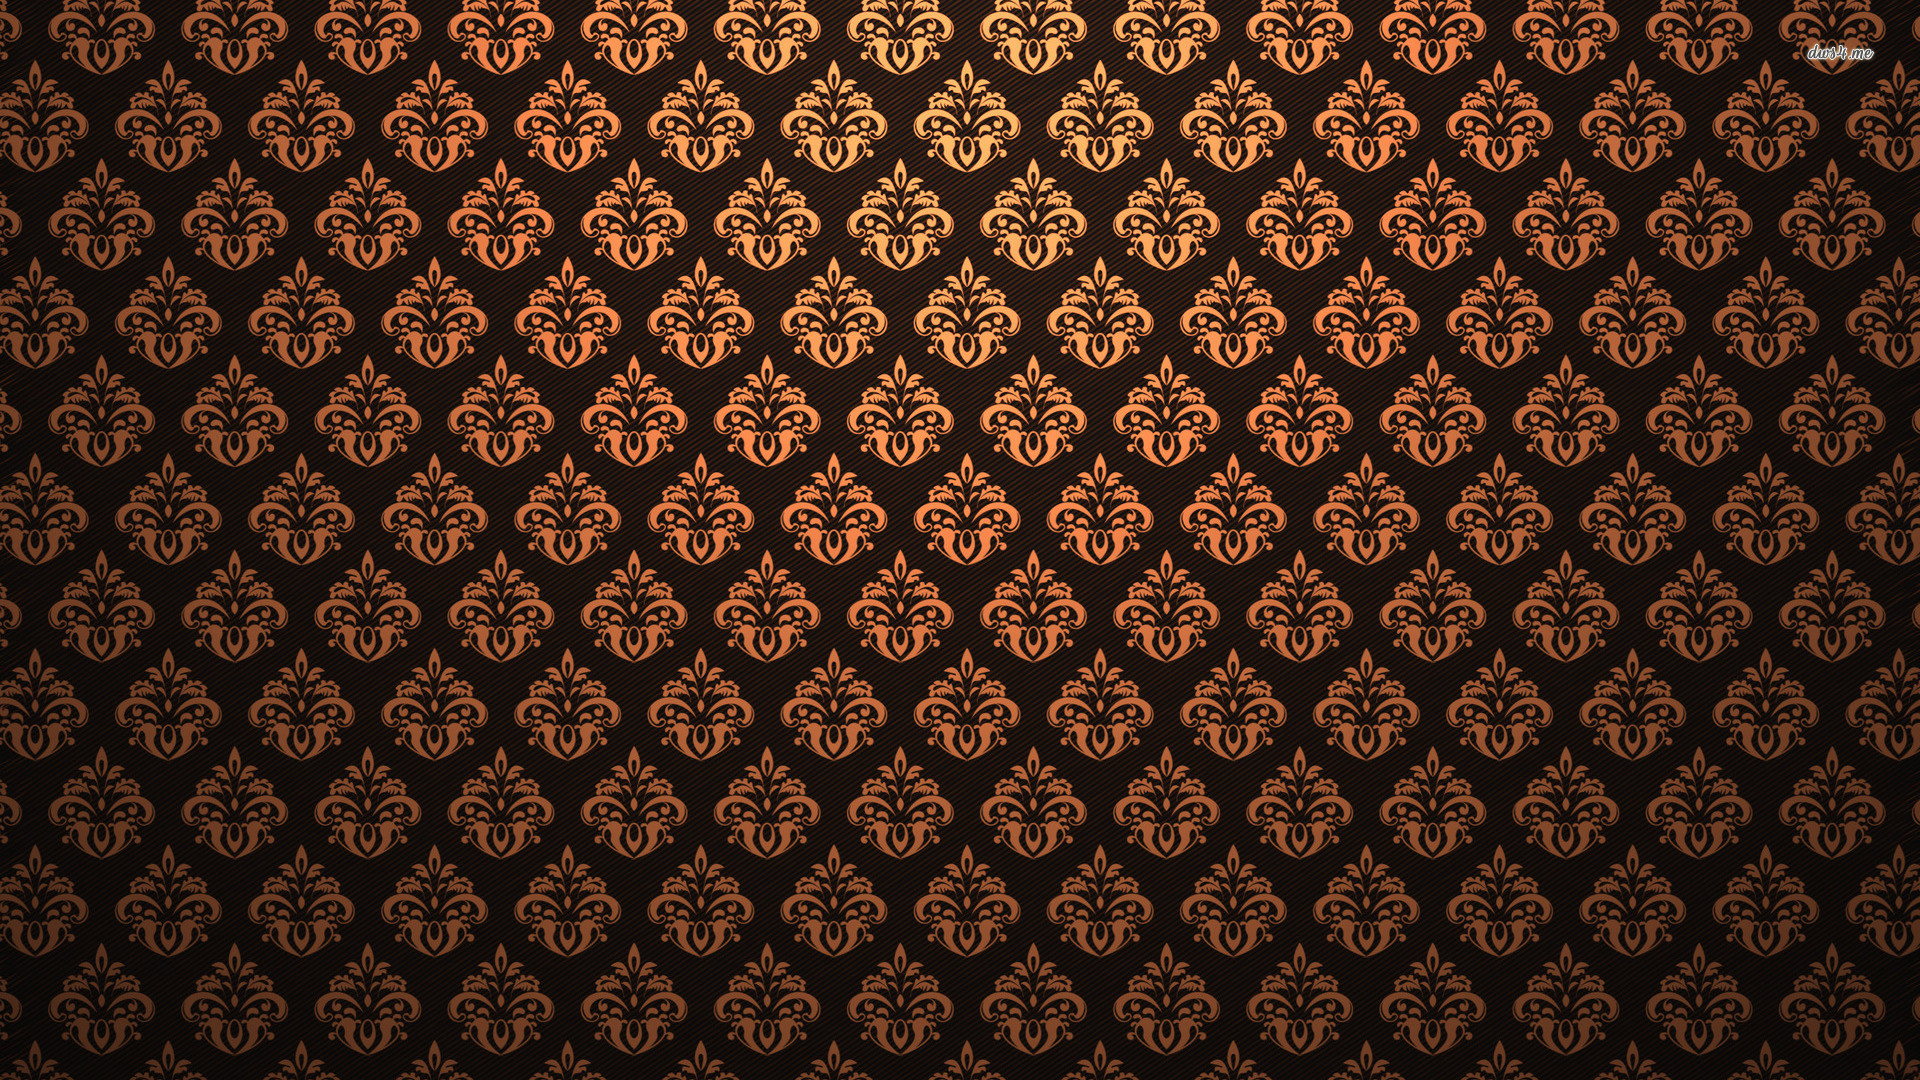 1920x1080 Seamless-Vintage-Pattern-Images-h--px-MB-